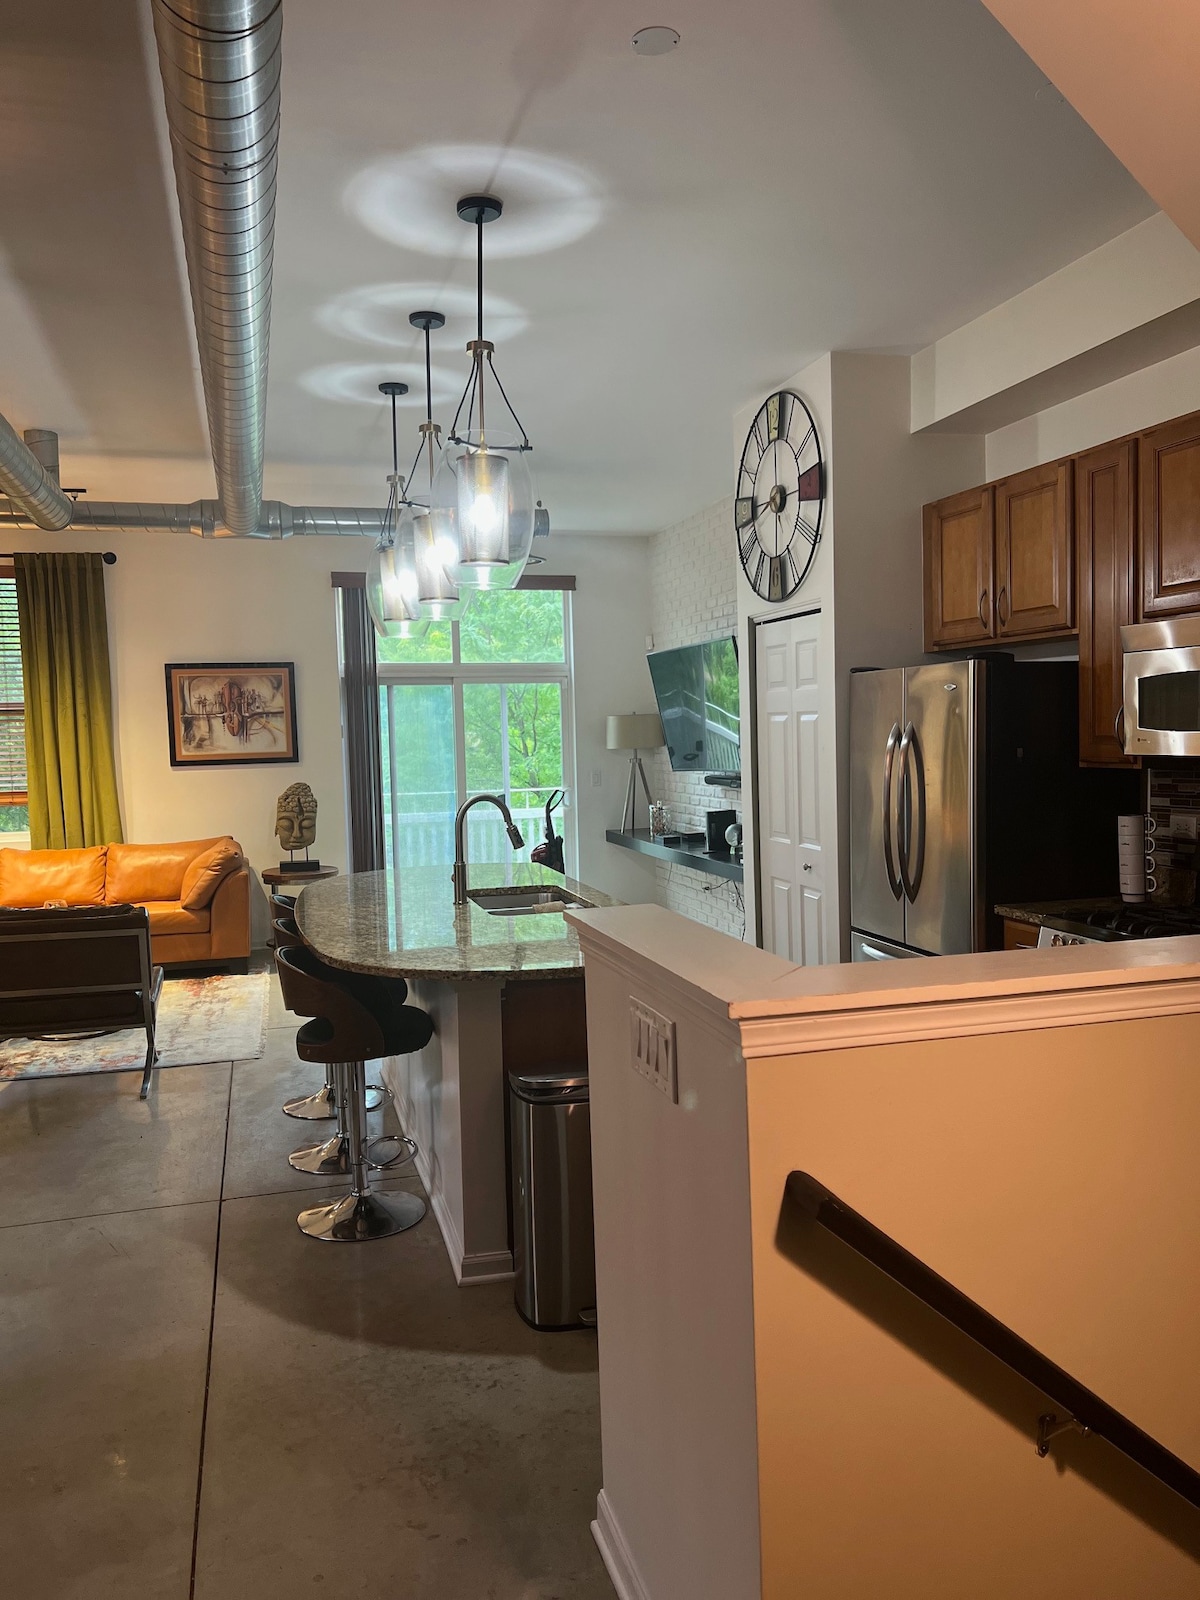 Modern 3 BR Loft Style Townhome in Great Location